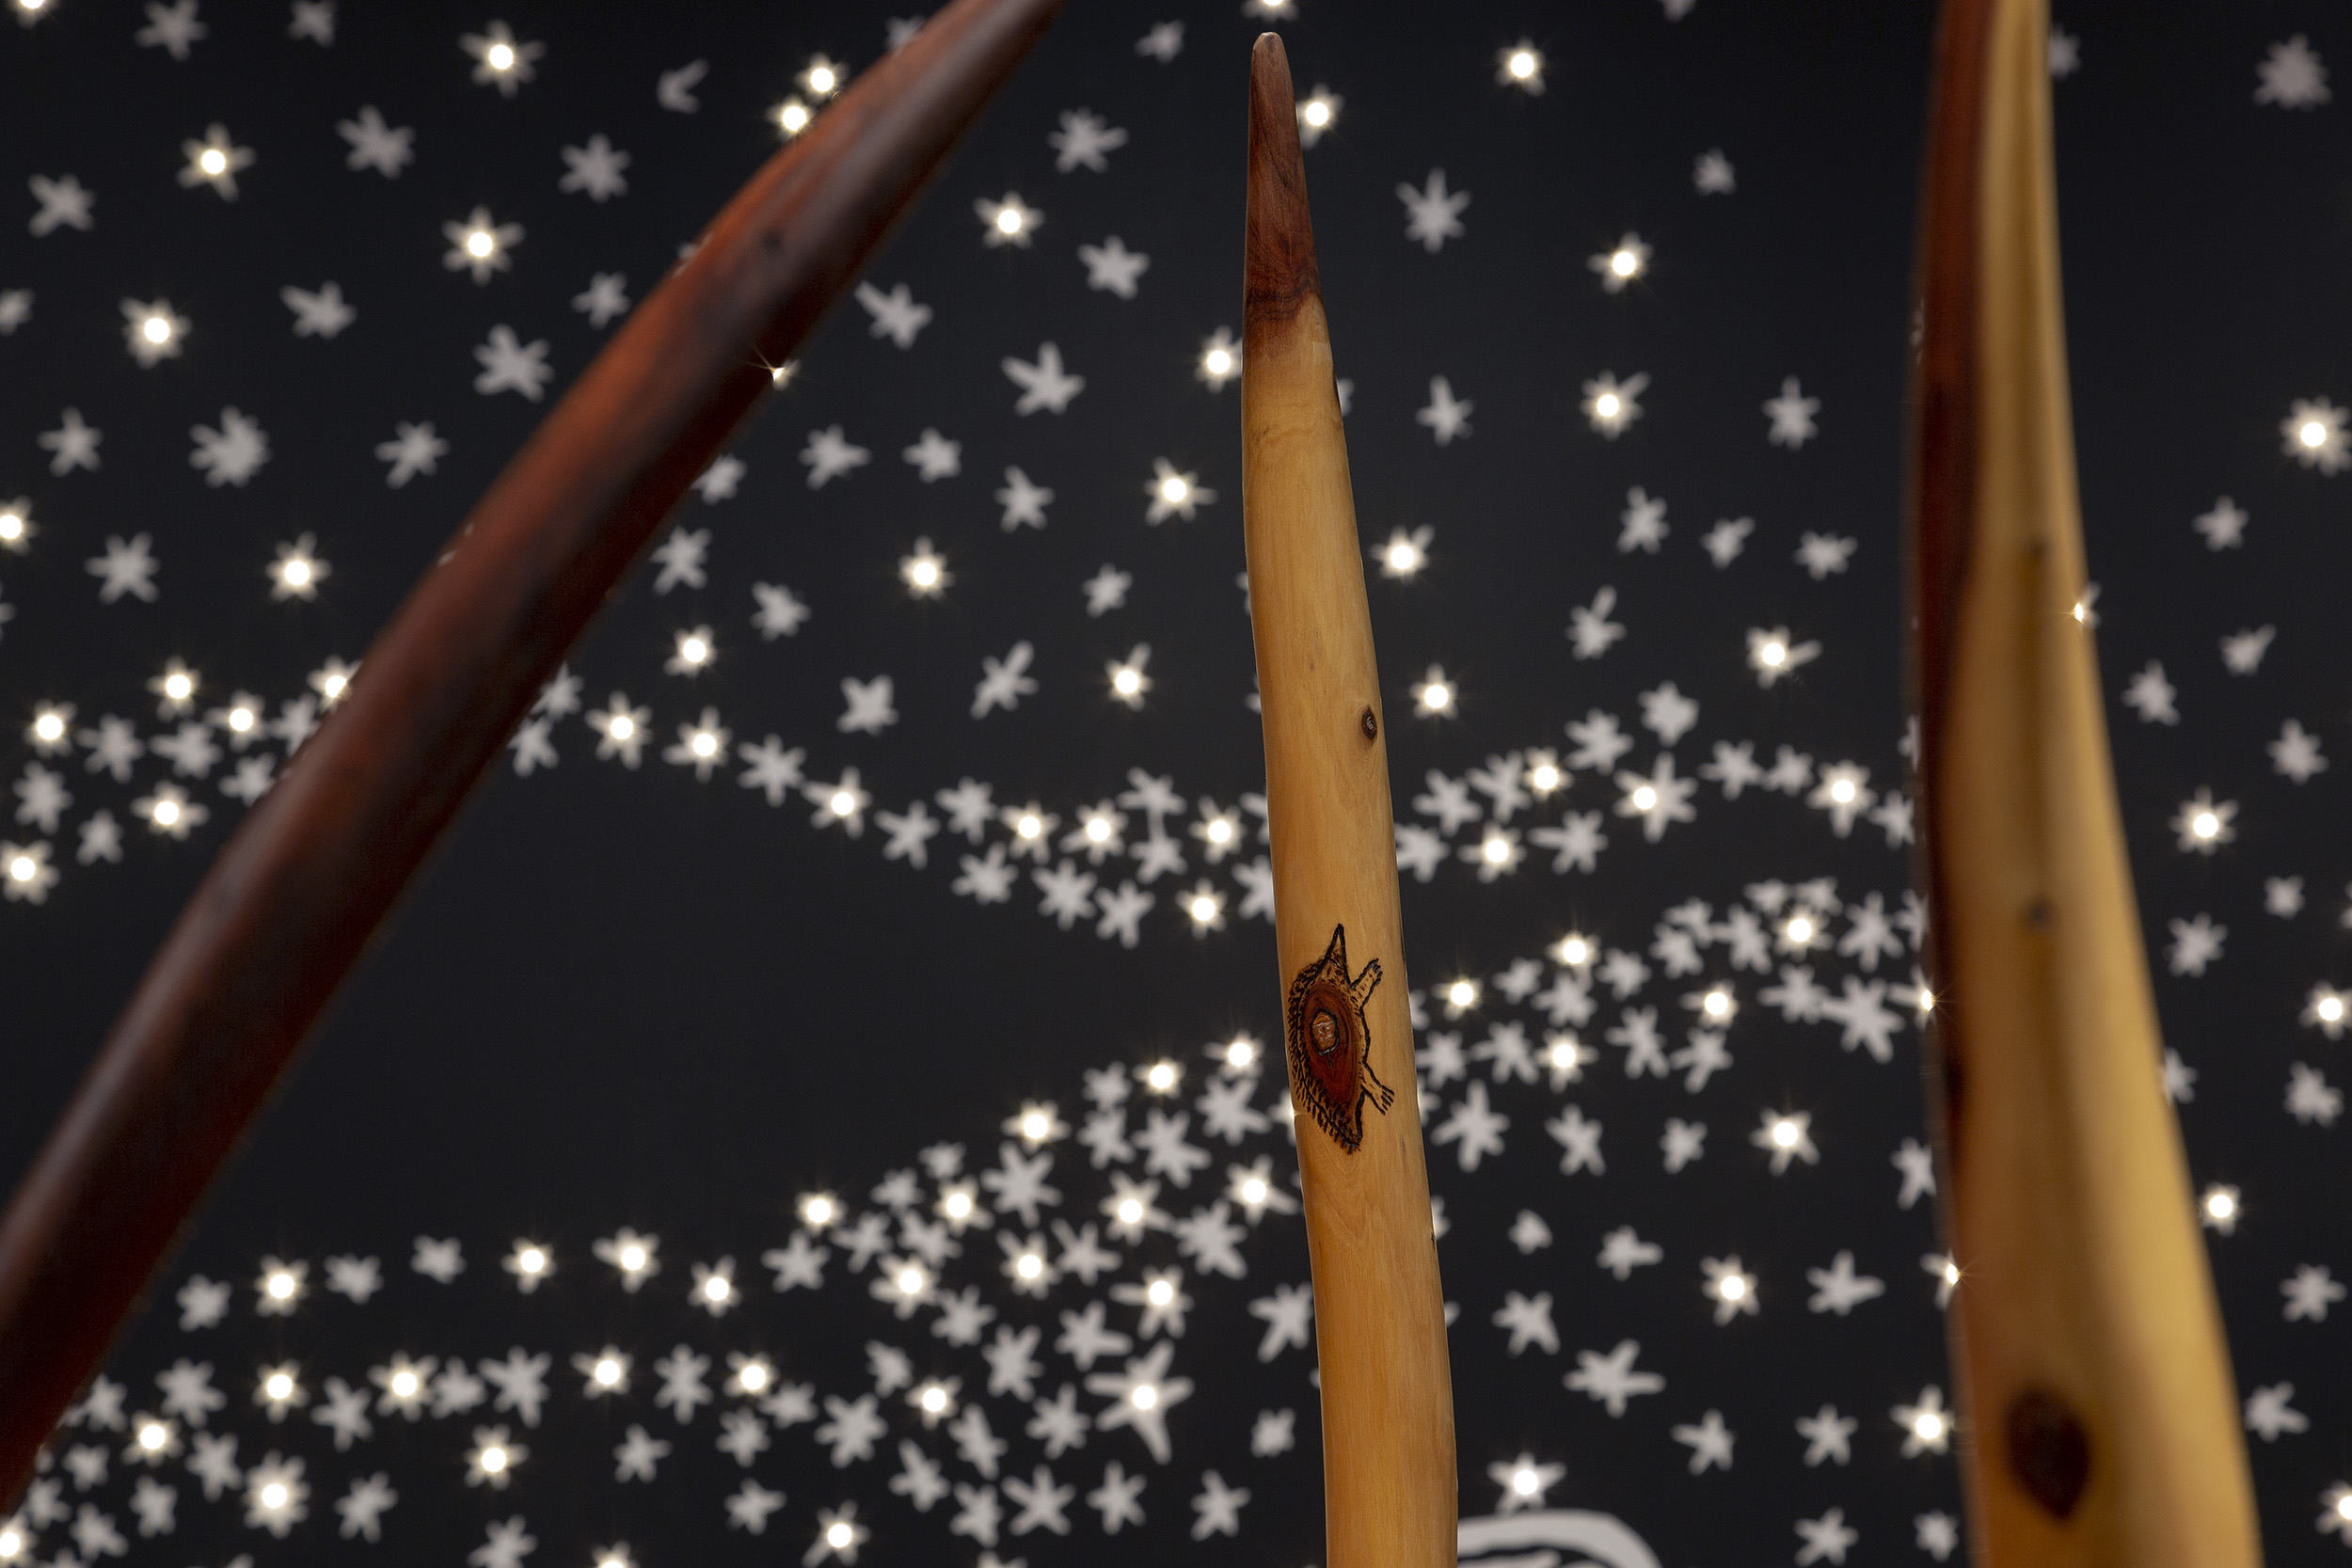 image of digging sticks used by South-Eastern Aboriginal women against a backdrop of a linocut of stars in the sky. The stars are in the shape of an emu.